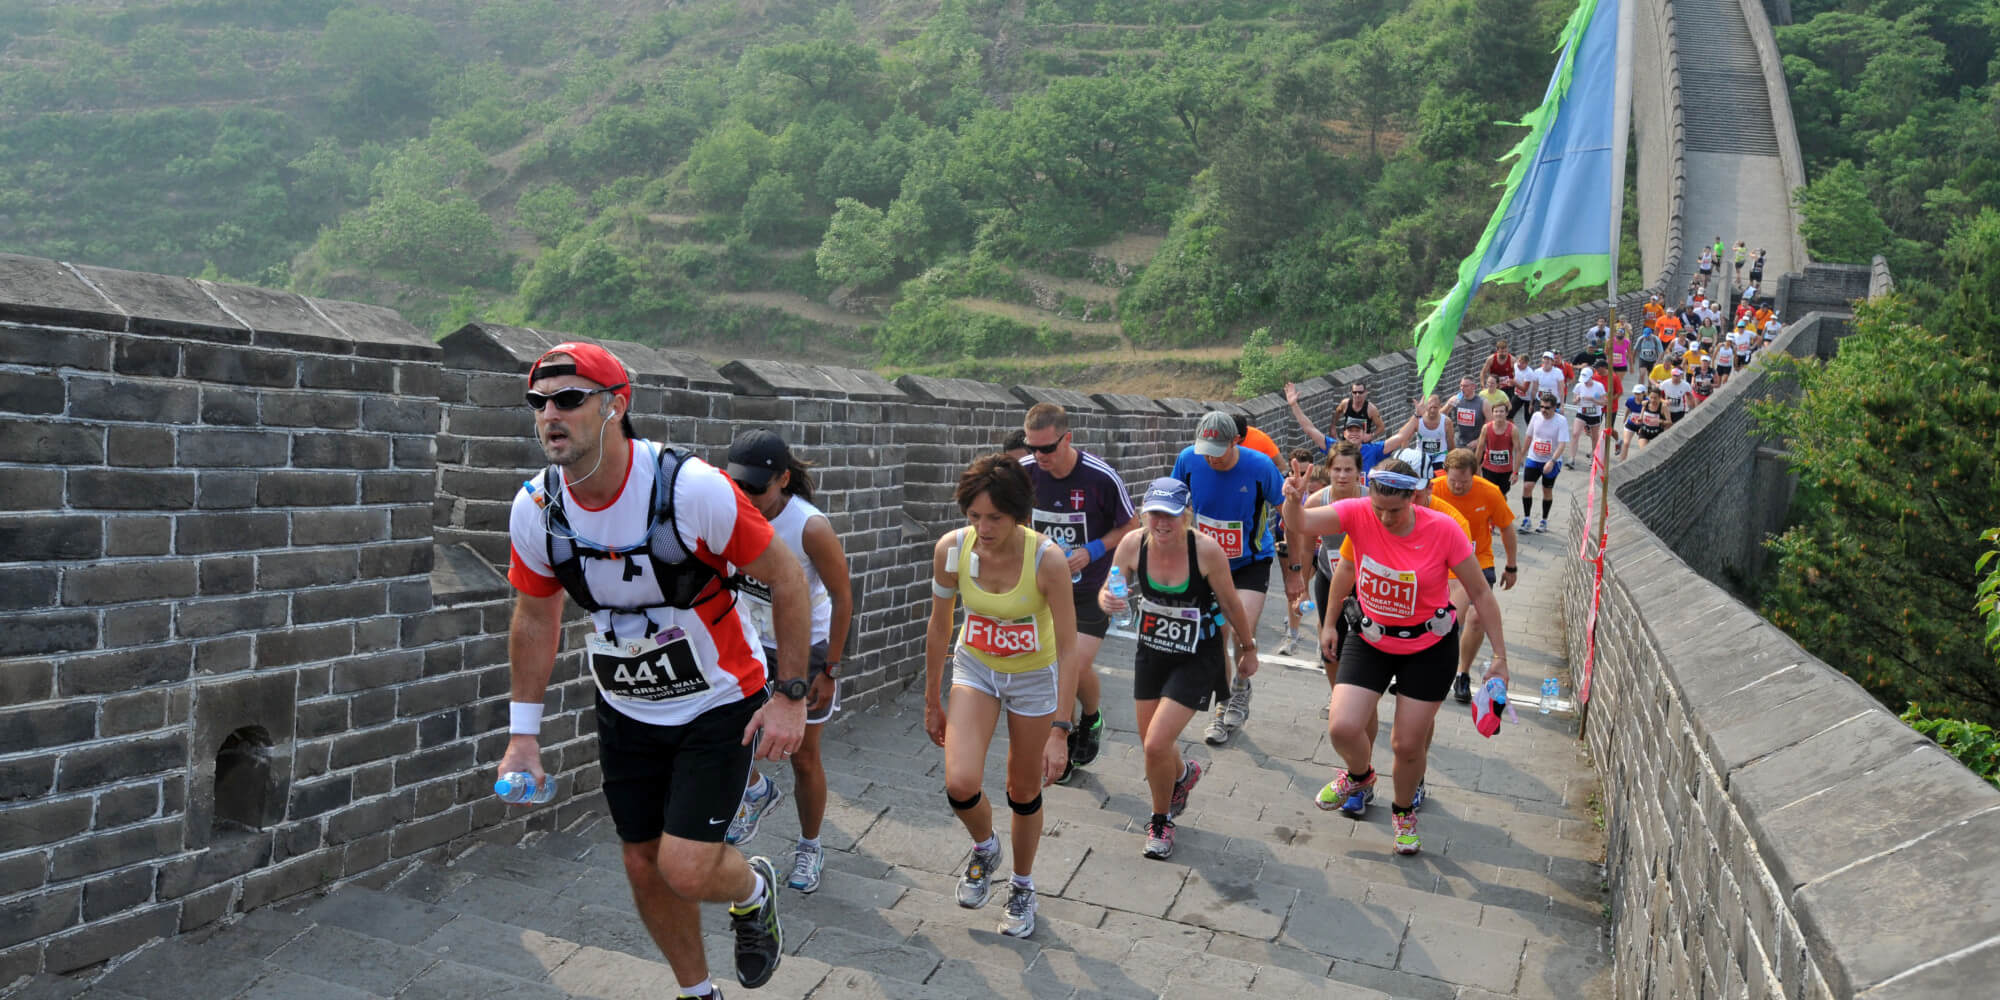 A Marathon, on the Great Wall? Welcome to China!